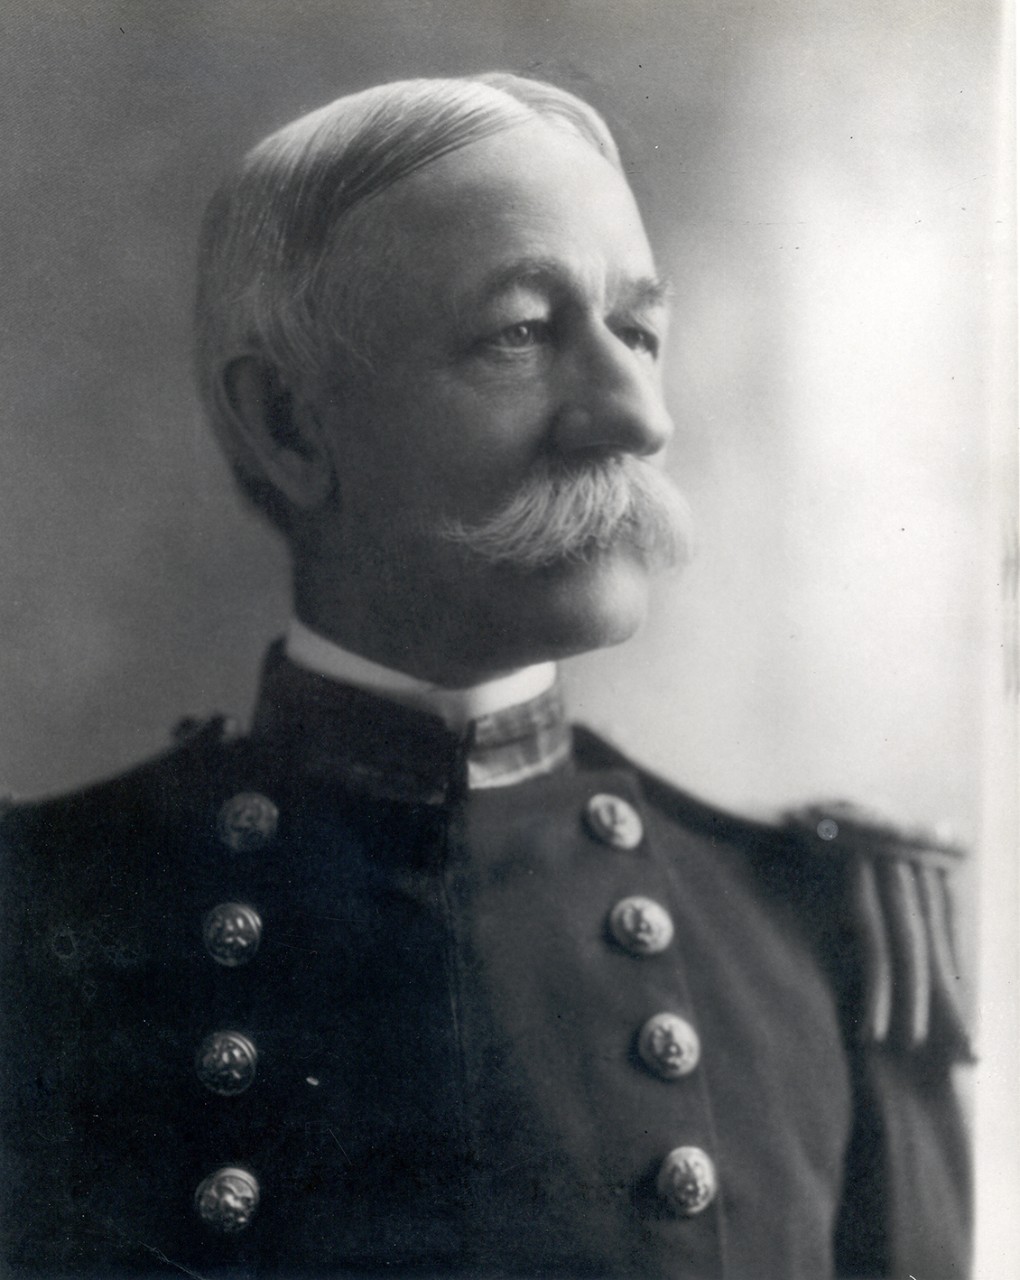 On April 7, 1898, President William McKinley broke precedence and appointed Mordecai Endicott to become the first member of the Civil Engineer Corps to command the Bureau of Yards and Docks. He was immediately elevated to the rank of Commodore and later Rear Admiral. Endicott became the first Chief to hold the rank of Rear Admiral, one which has been held by all Chiefs of the Bureau ever since. He was reappointed Chief in 1902 and again in 1906.